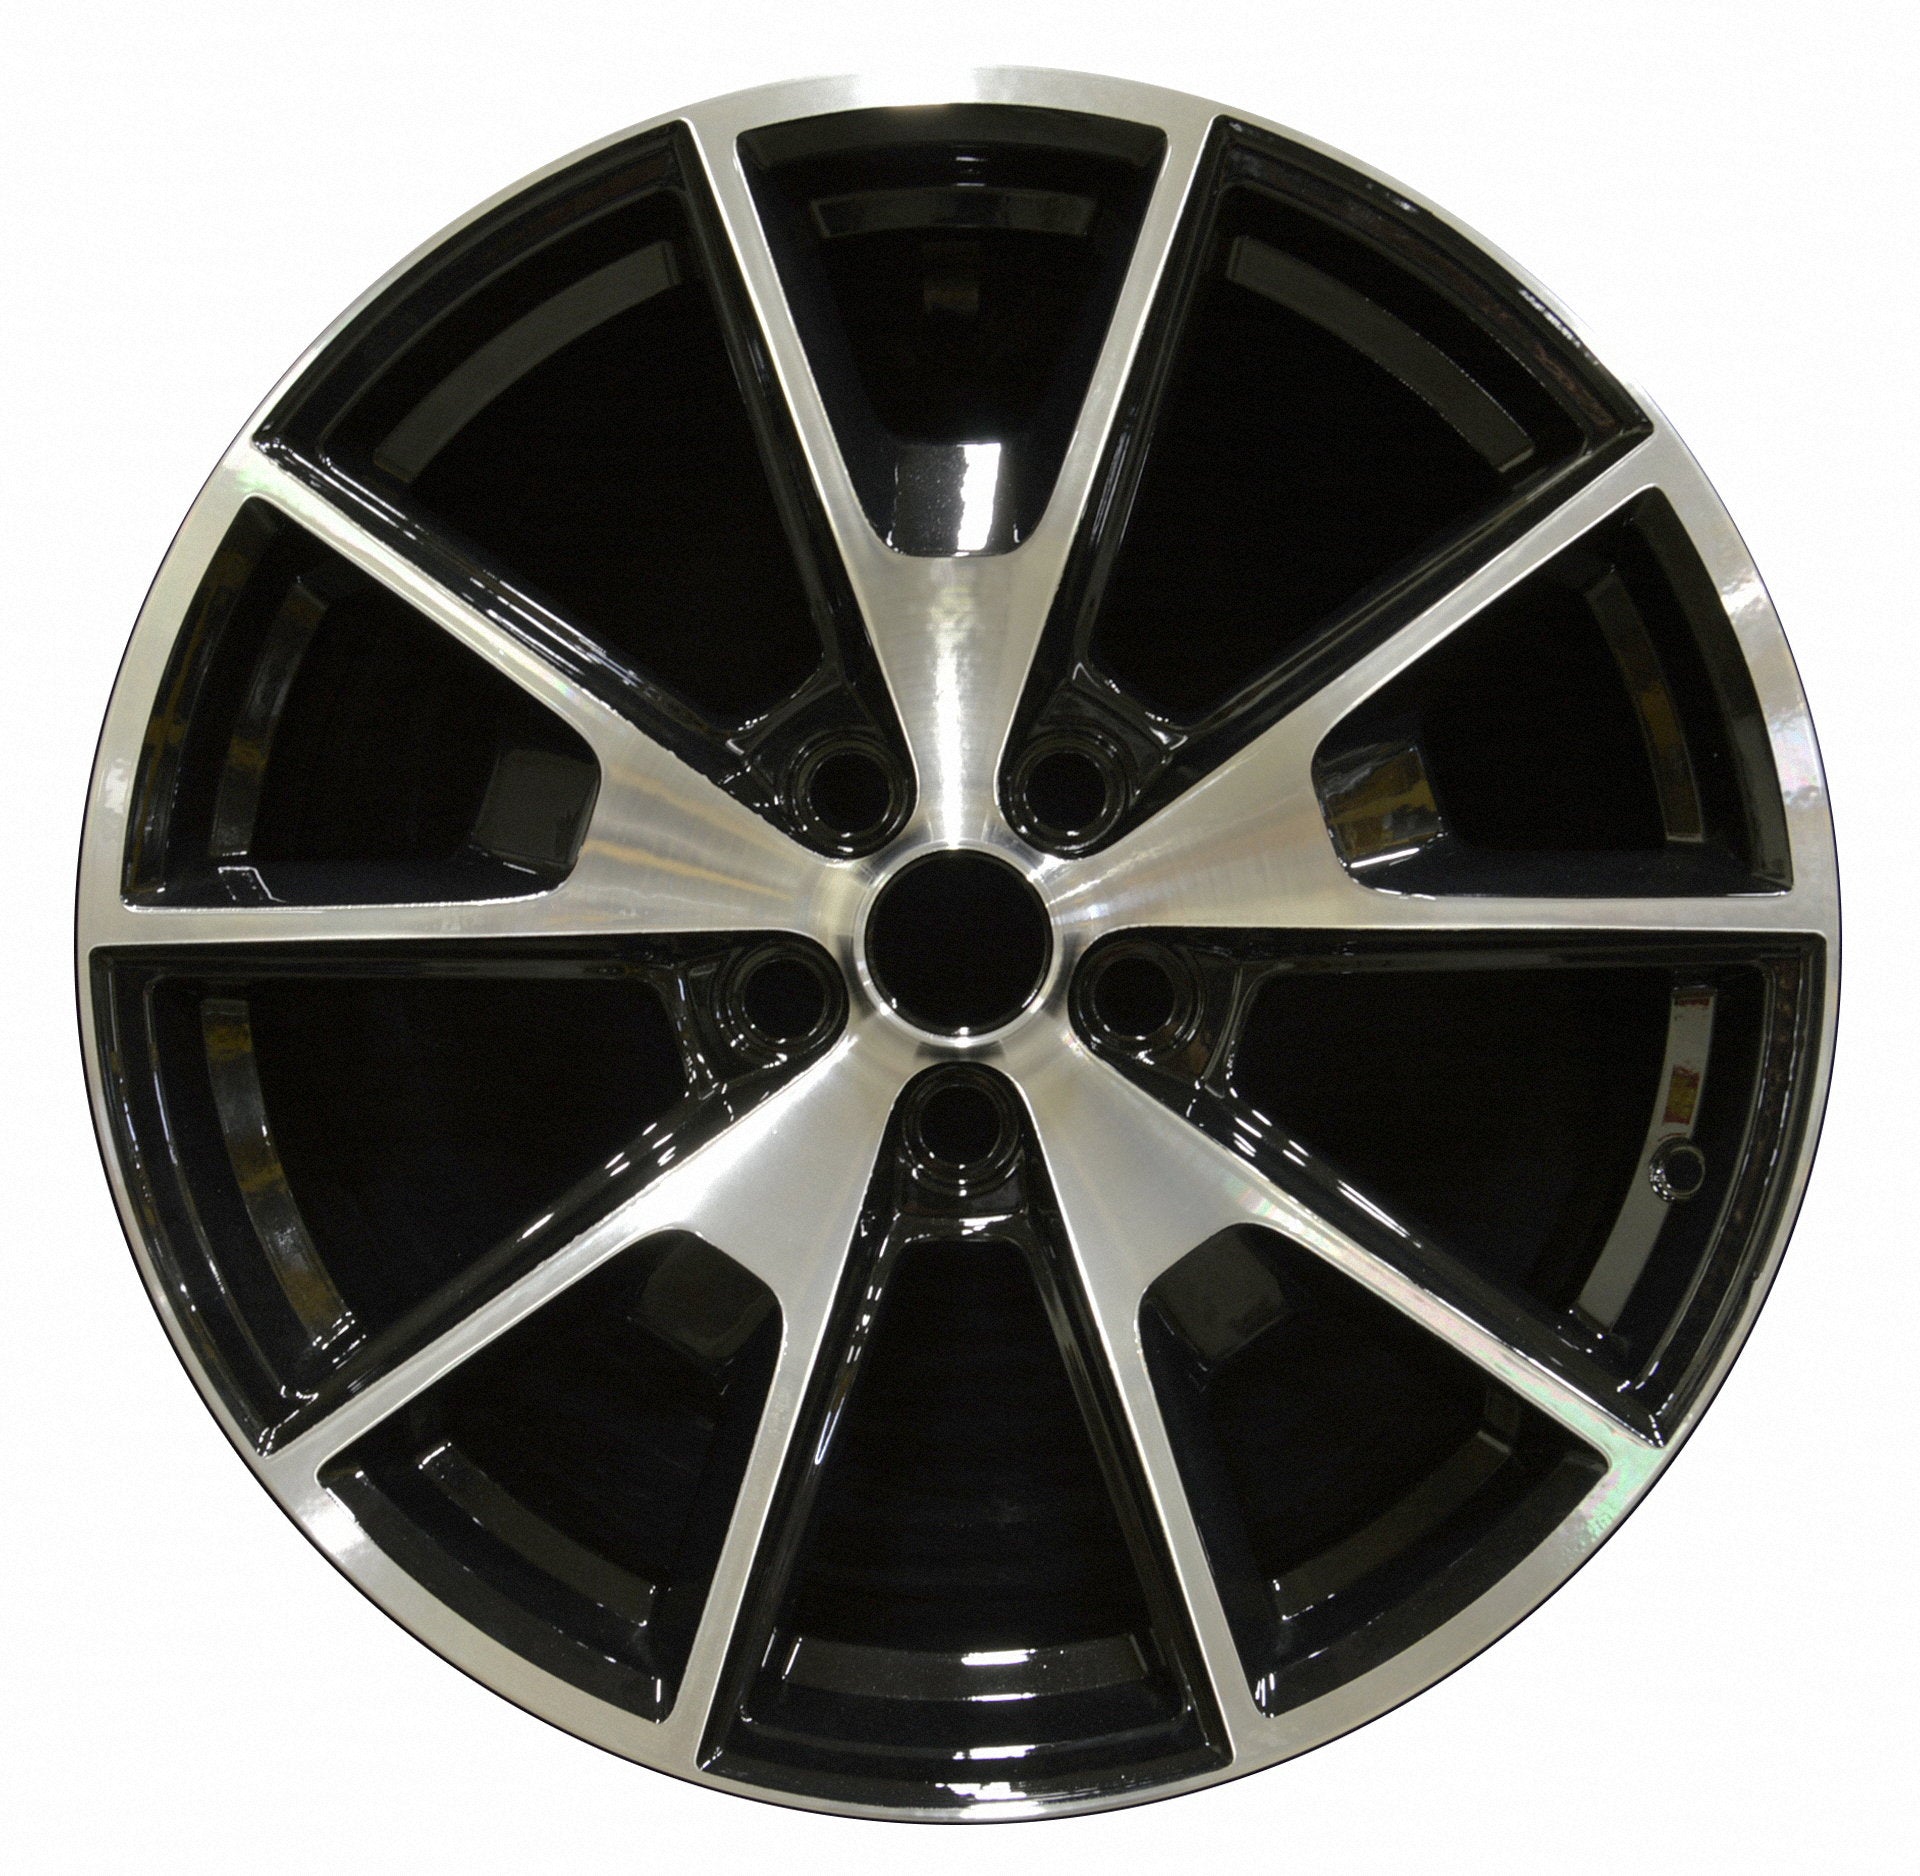 Ford Mustang  2015 Factory OEM Car Wheel Size 19x8.5 Alloy WAO.10033.PB01.MA